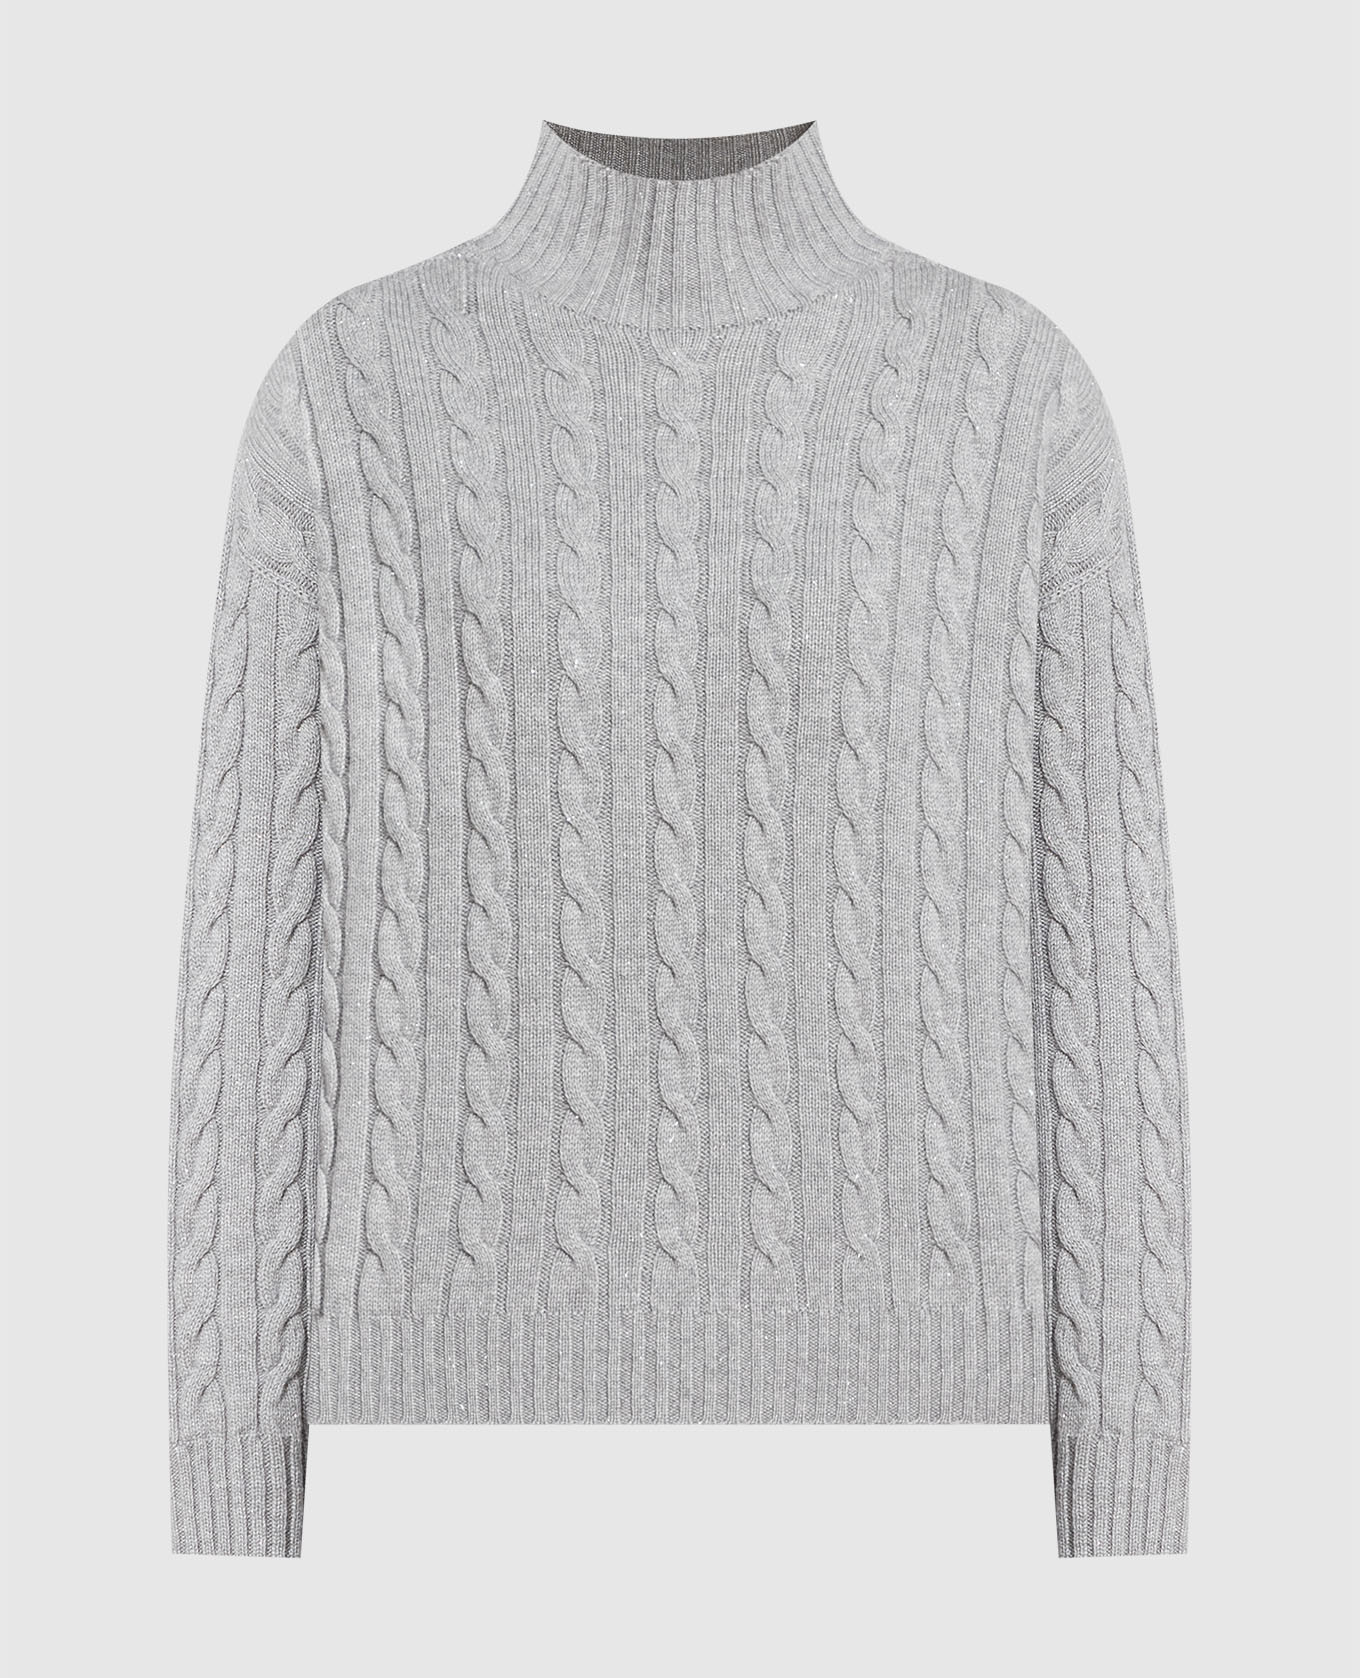 Gray sweater with a textured pattern